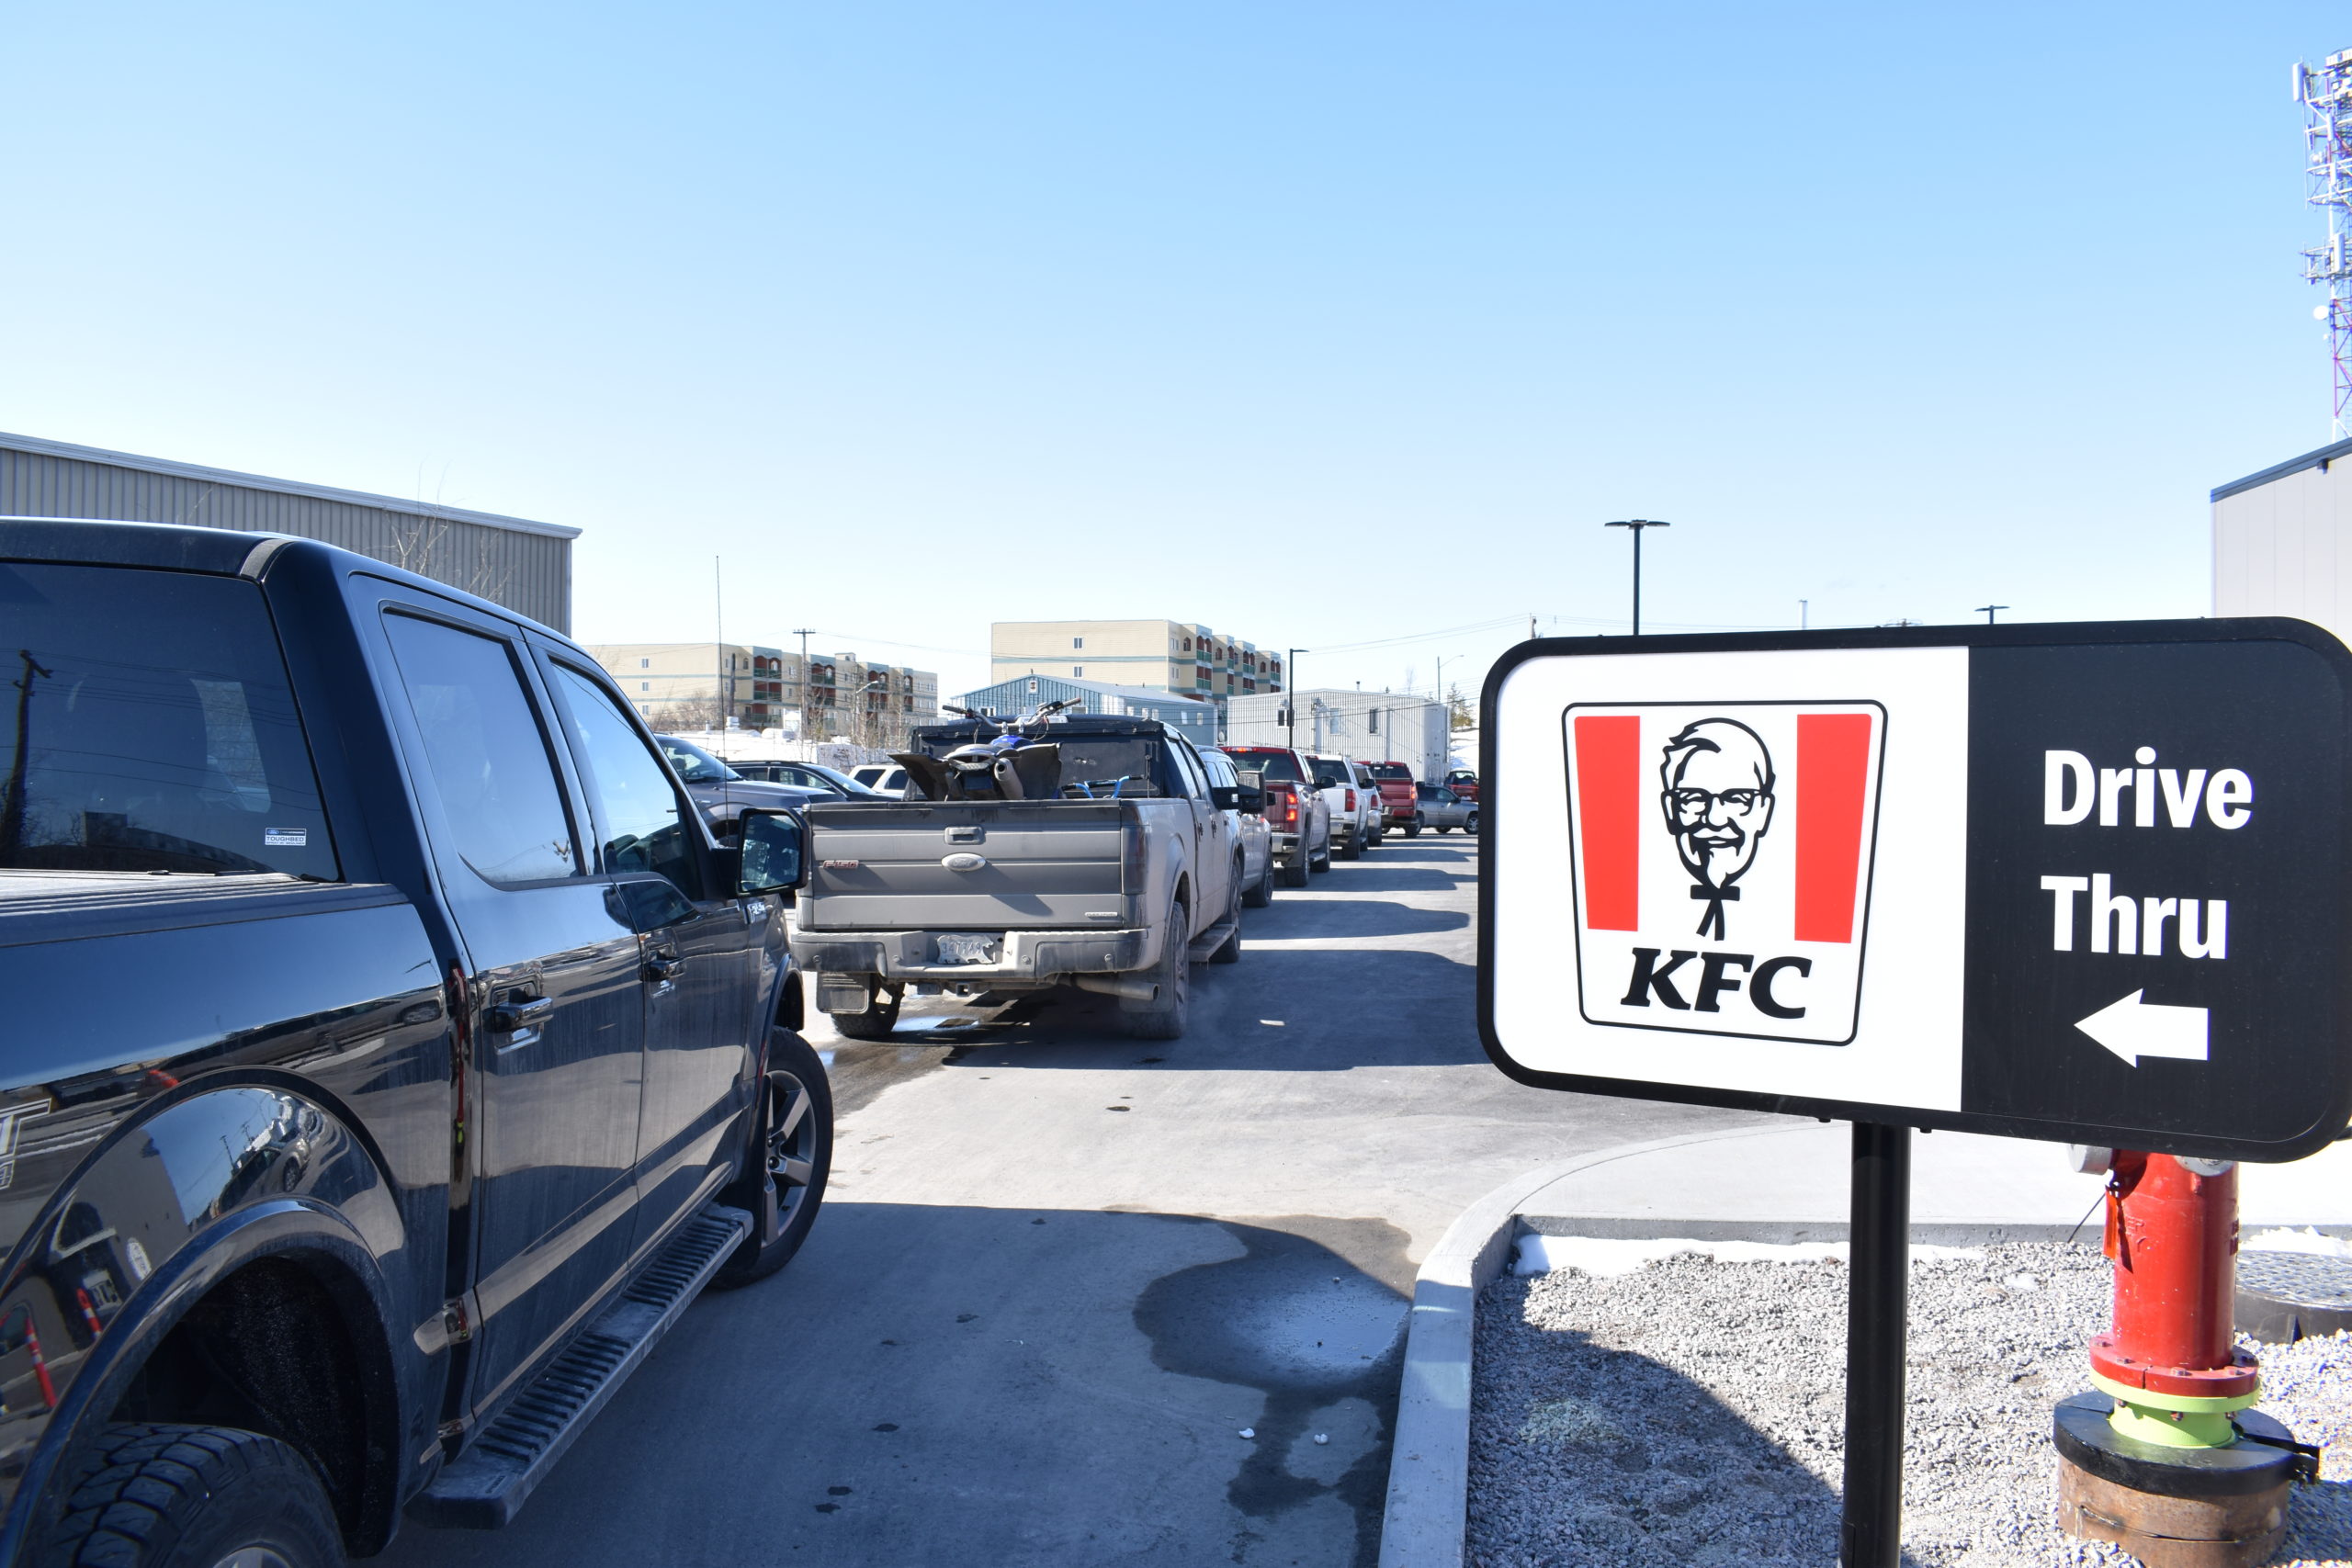 More than 25 vehicles were lined up in the drive thru before the restaurant opened at 10:30 a.m. Blair McBride/NNSL photo